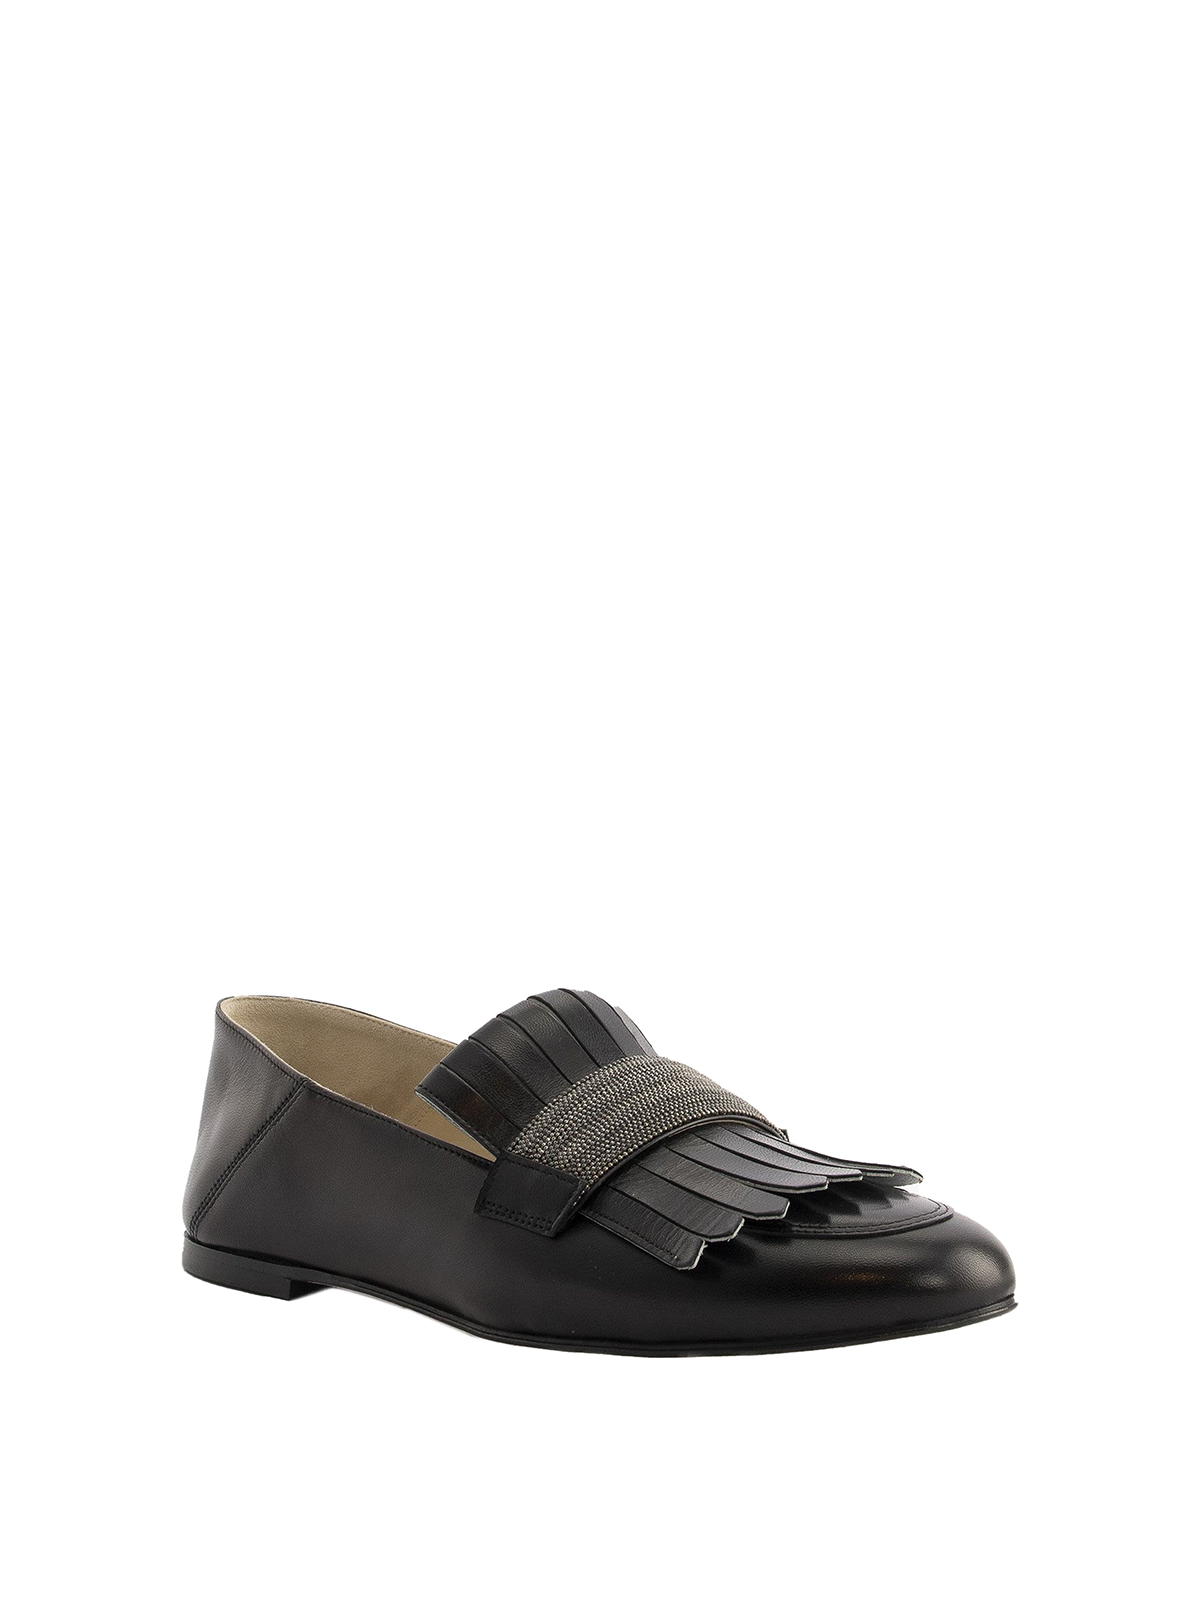 Loafers & Slippers Fabiana Filippi - Beatrice black loafers ...